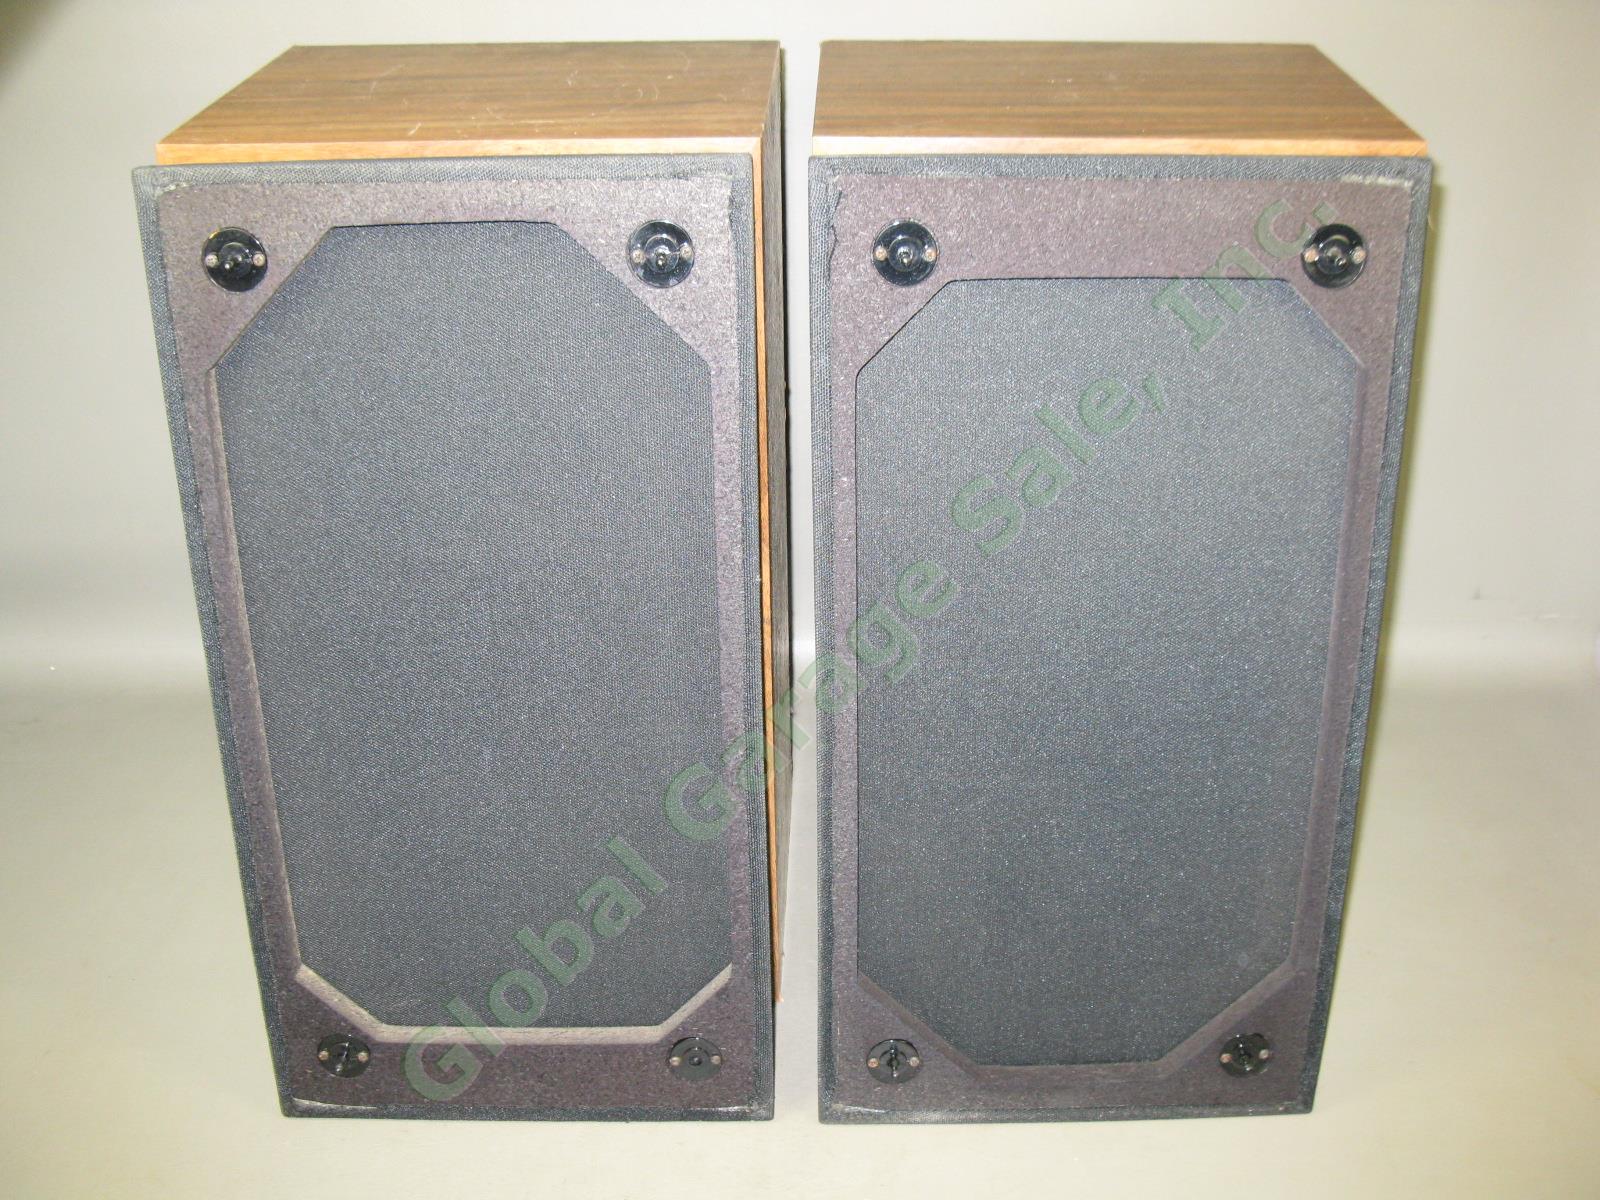 Vtg Yamaha NS-4 Audio Stereo Speakers Pair Set Lot Consecutive Serial Numbers NR 4